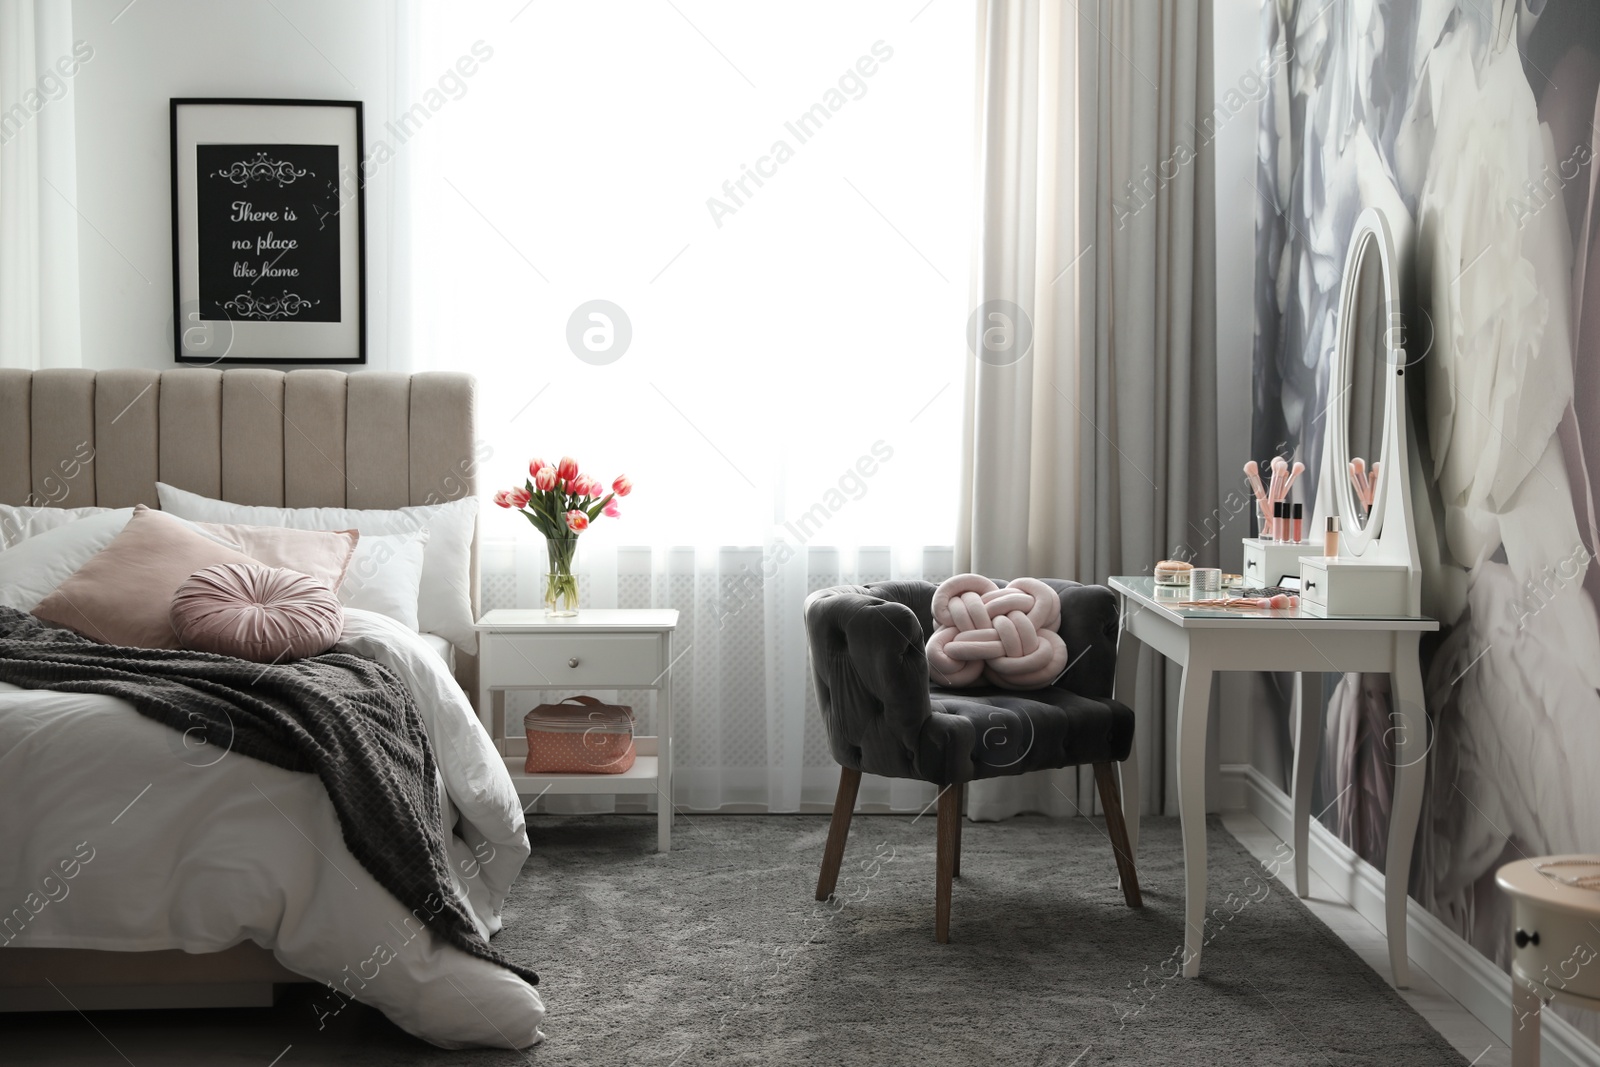 Photo of Stylish bedroom interior with elegant dressing table and floral wallpaper